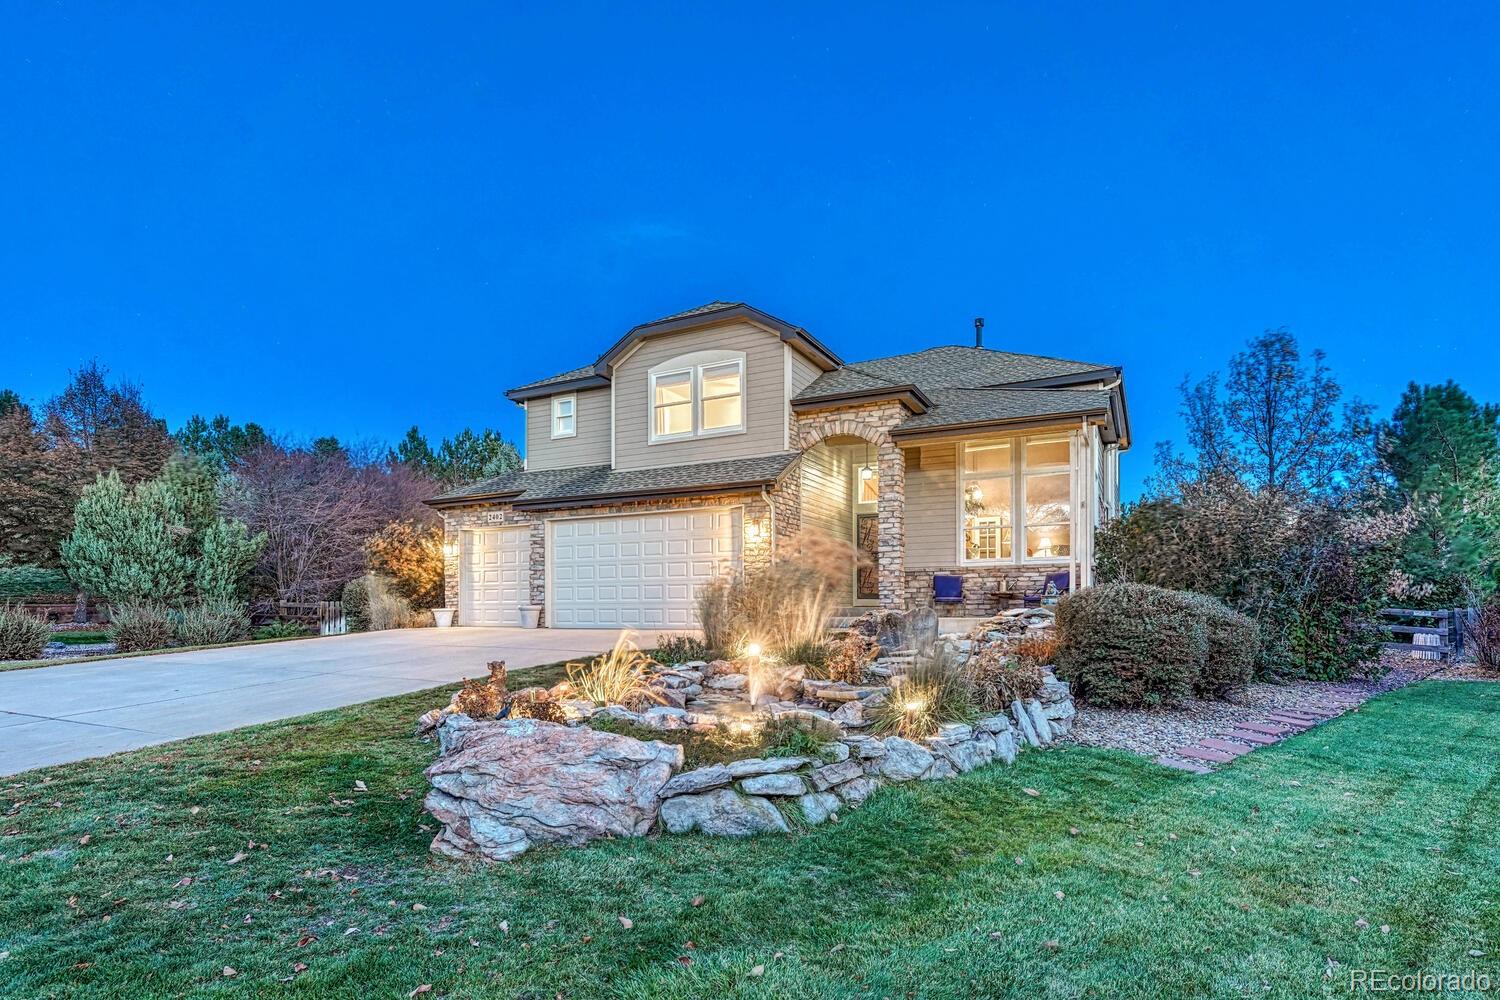 Report Image for 2402 S Miller Court,Lakewood, Colorado